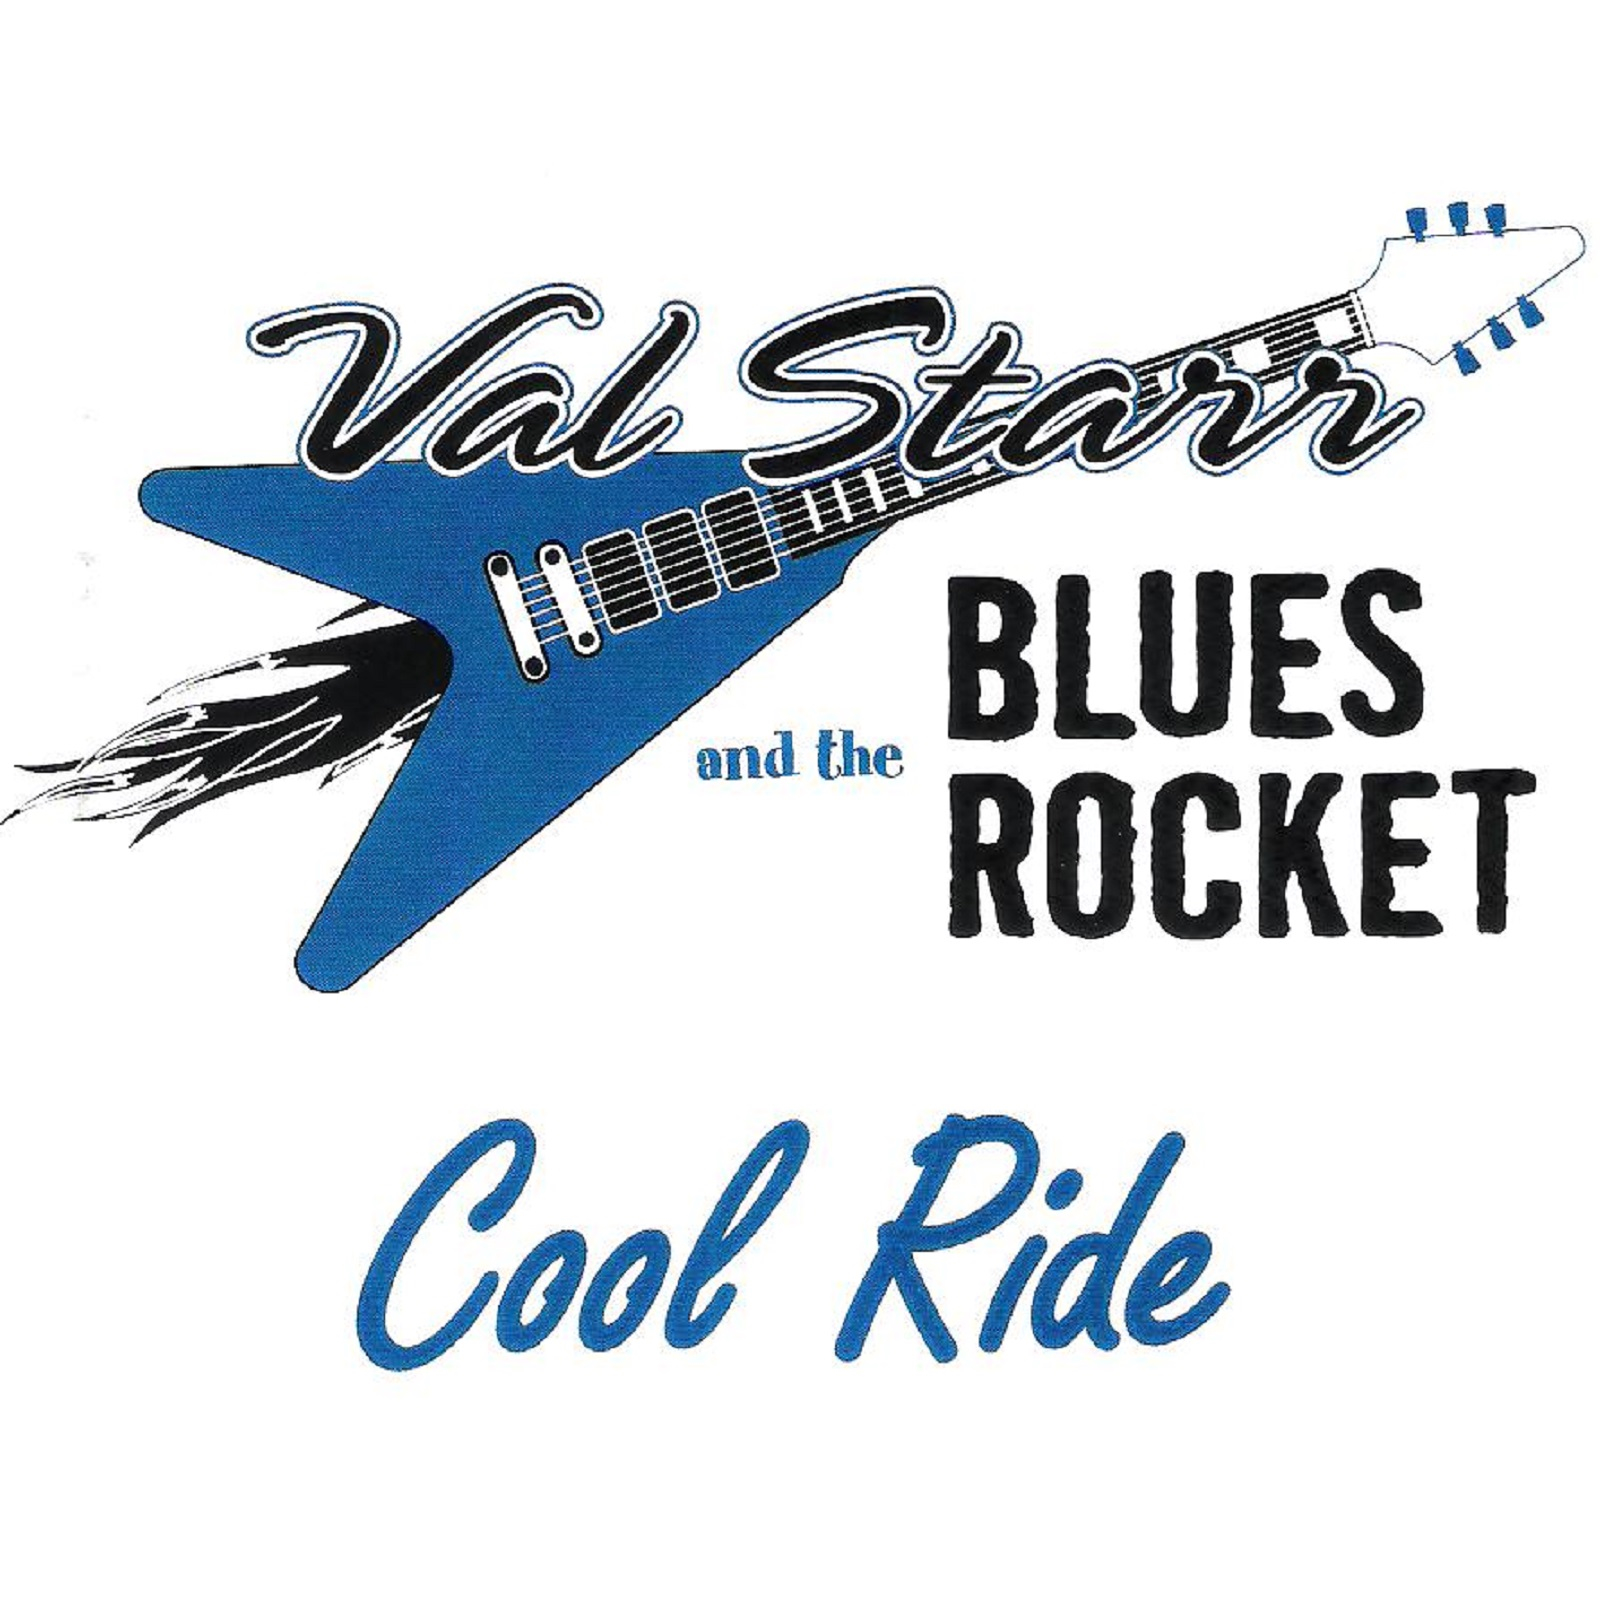 Cool Ride - Val Starr & the Blues Rocket, Album Cover